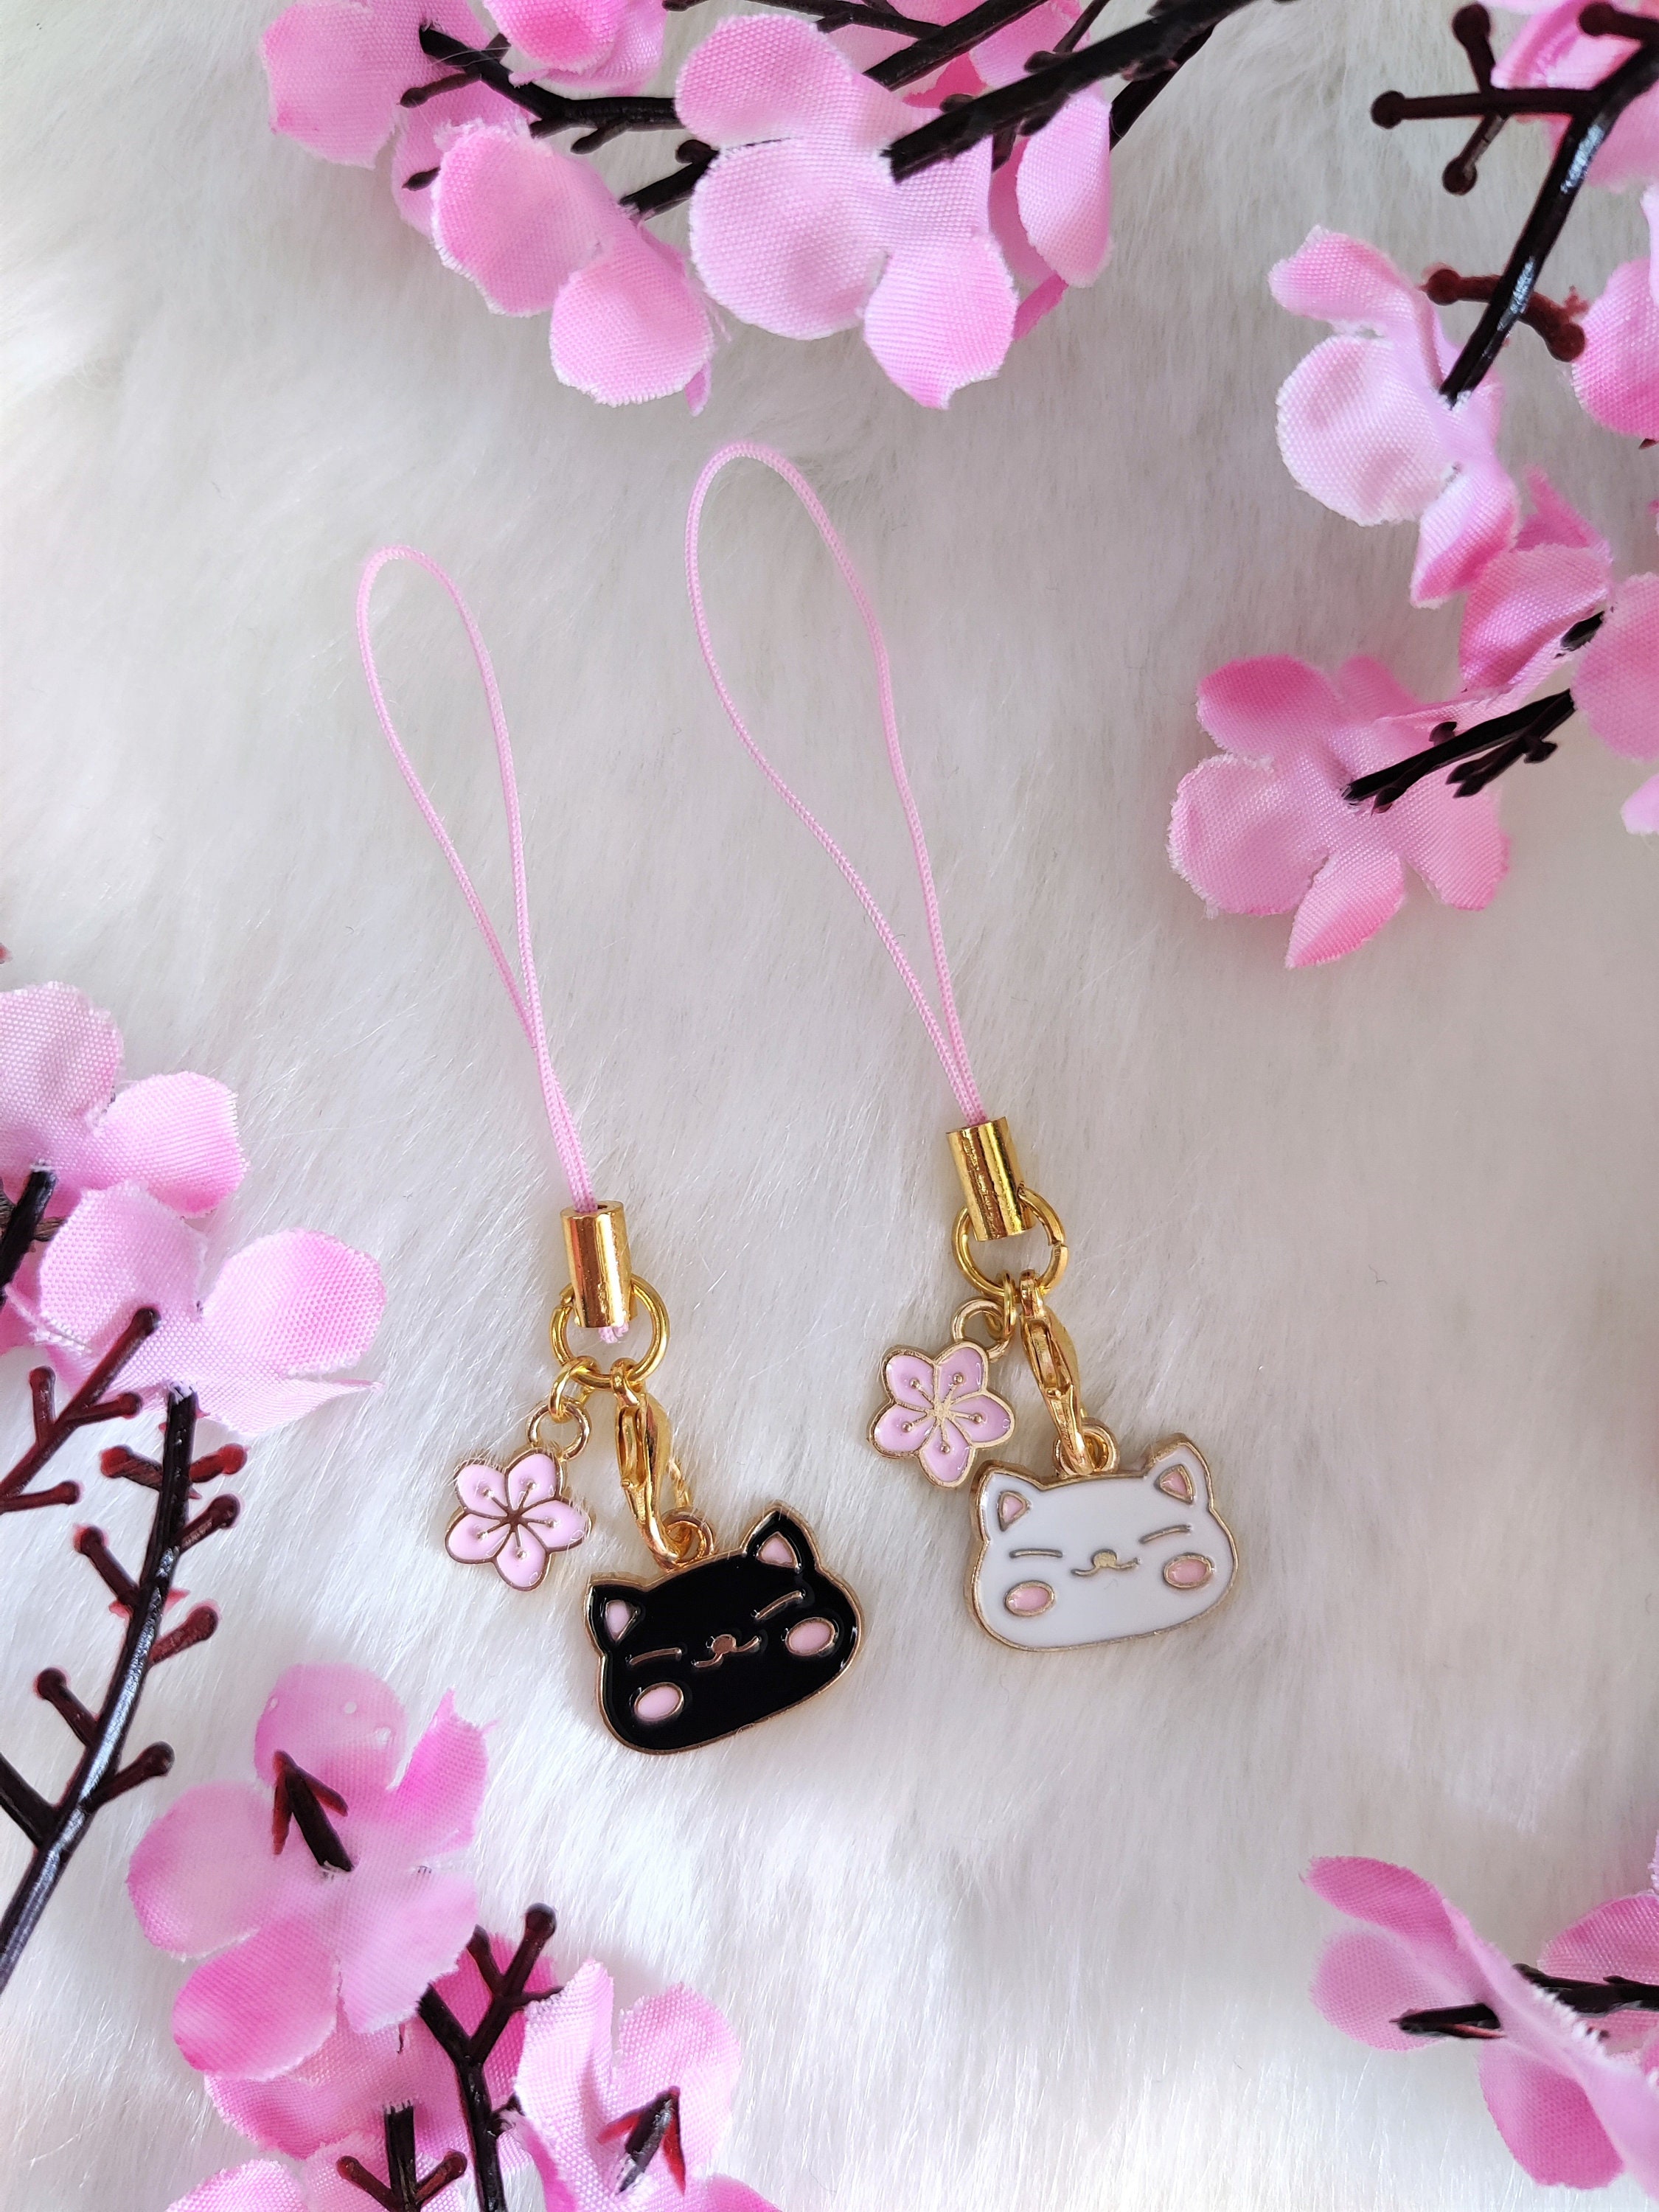  Sopopal 6 Pcs Cat Phone Charm Aesthetic Cell Phone Charm Kawaii  With Handmade Cute Hanging Pendants Decor : Cell Phones & Accessories